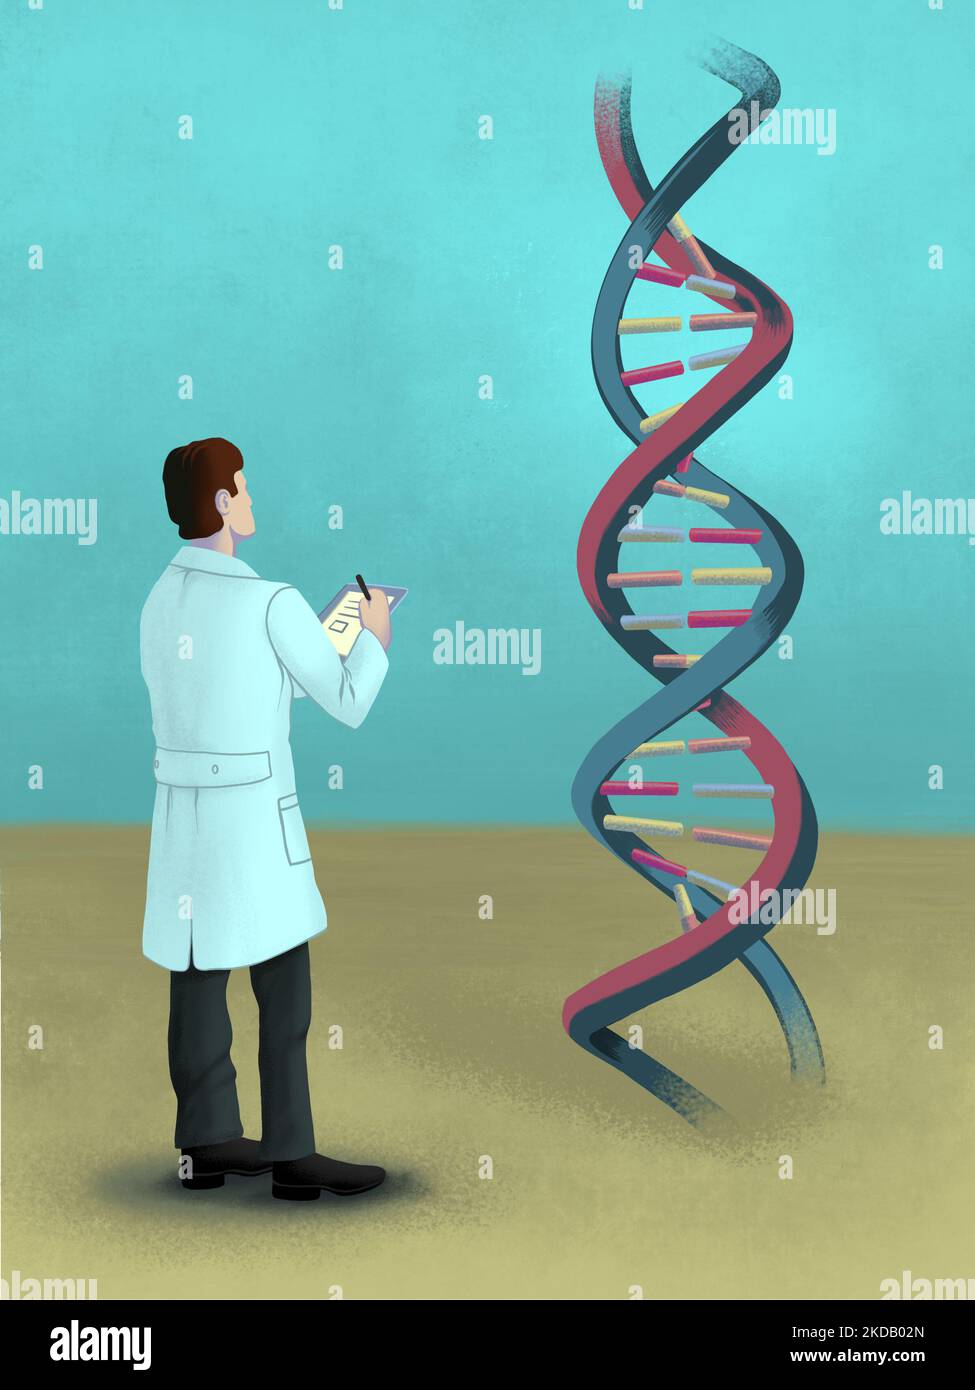 Scientist holding a notepad and looking at a Dna helix. Digital hand-painted illustration. Stock Photo